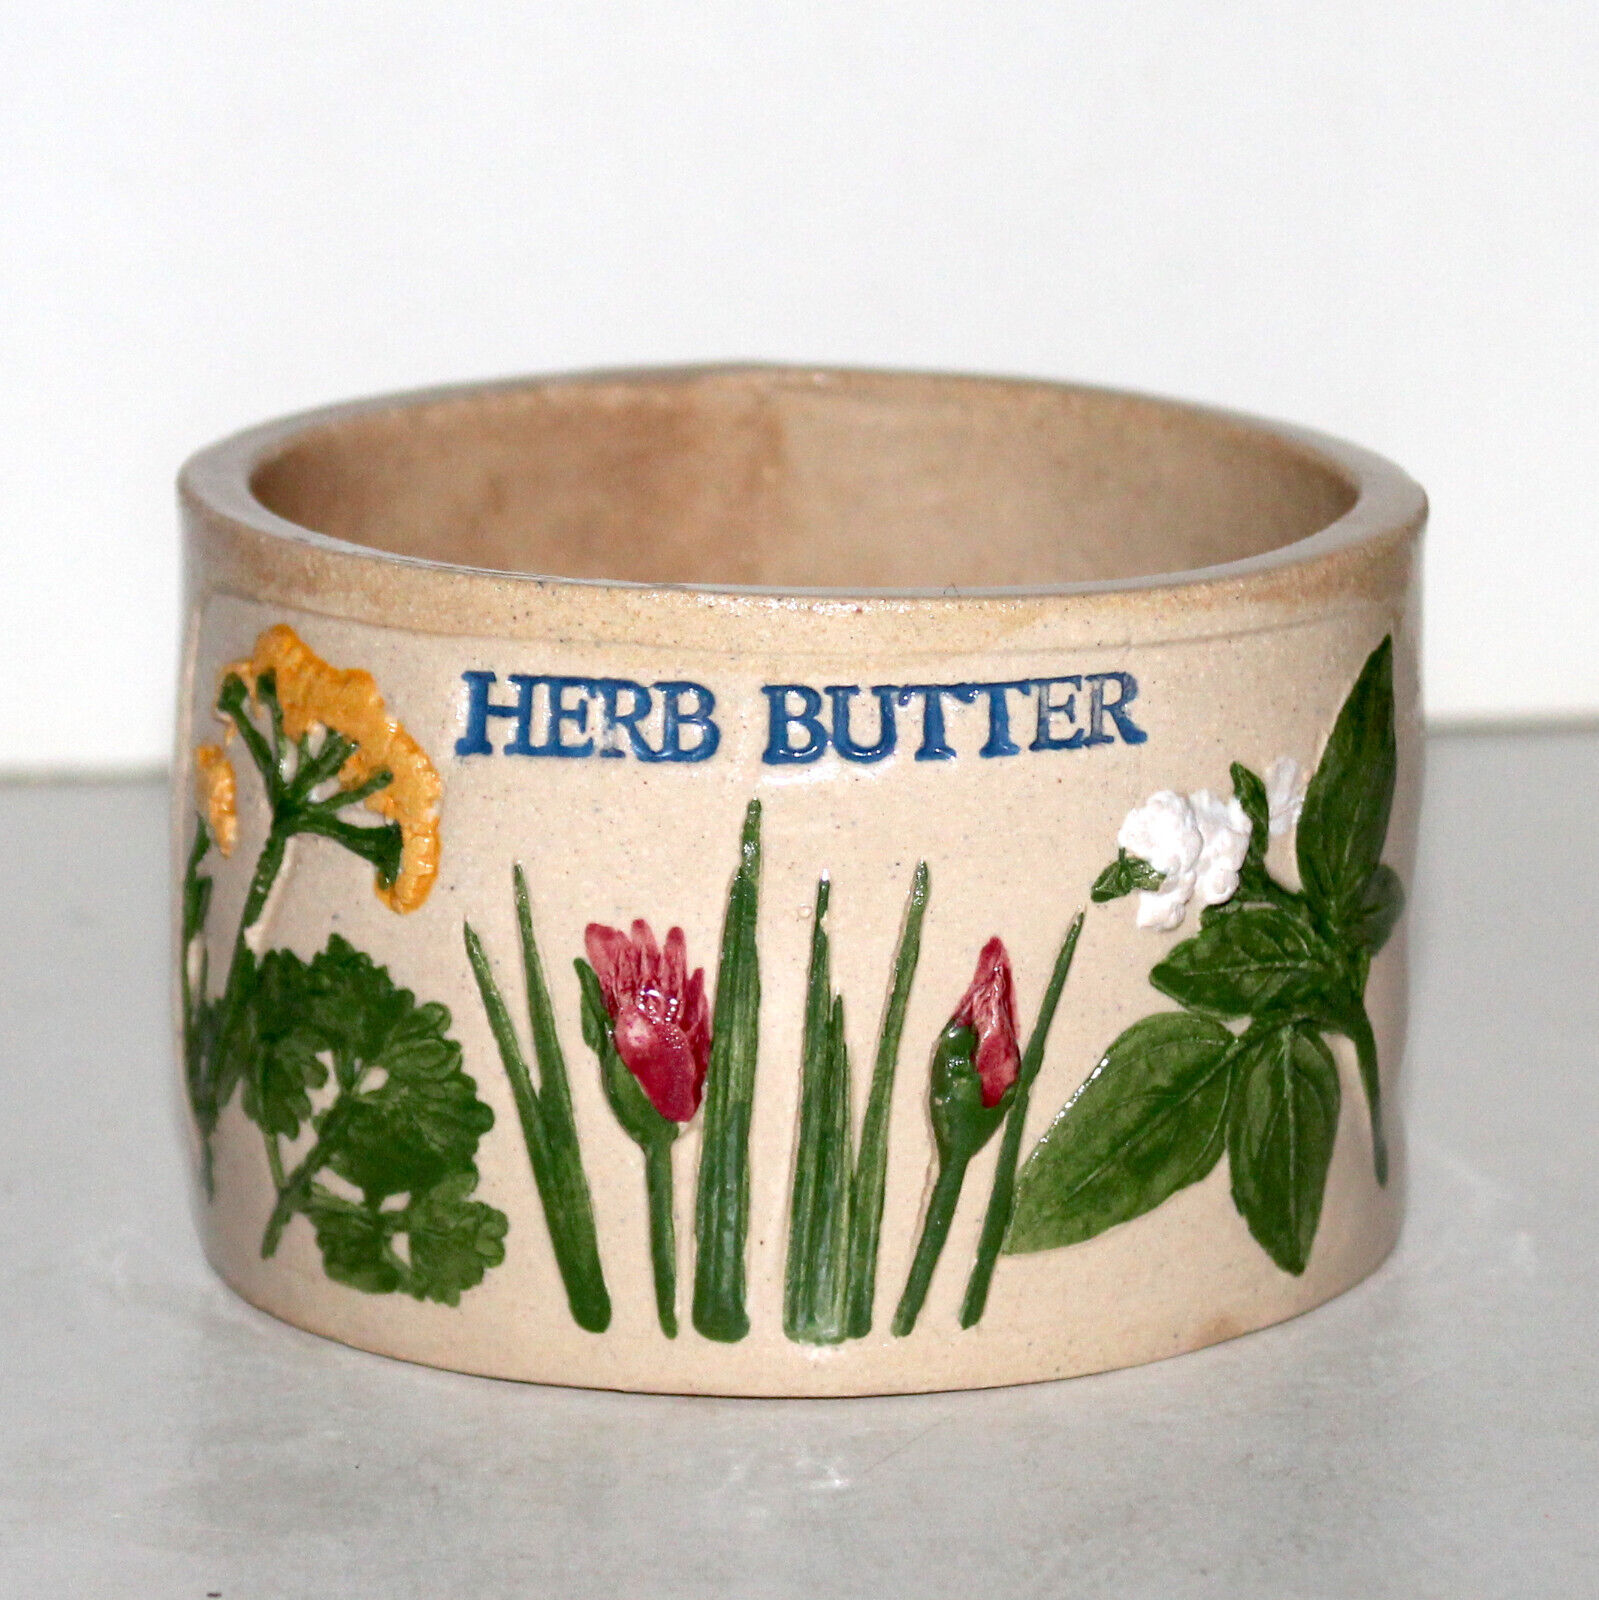 Herb Butter pot crock container Monika Calhoun Herbs in Clay collection 1992